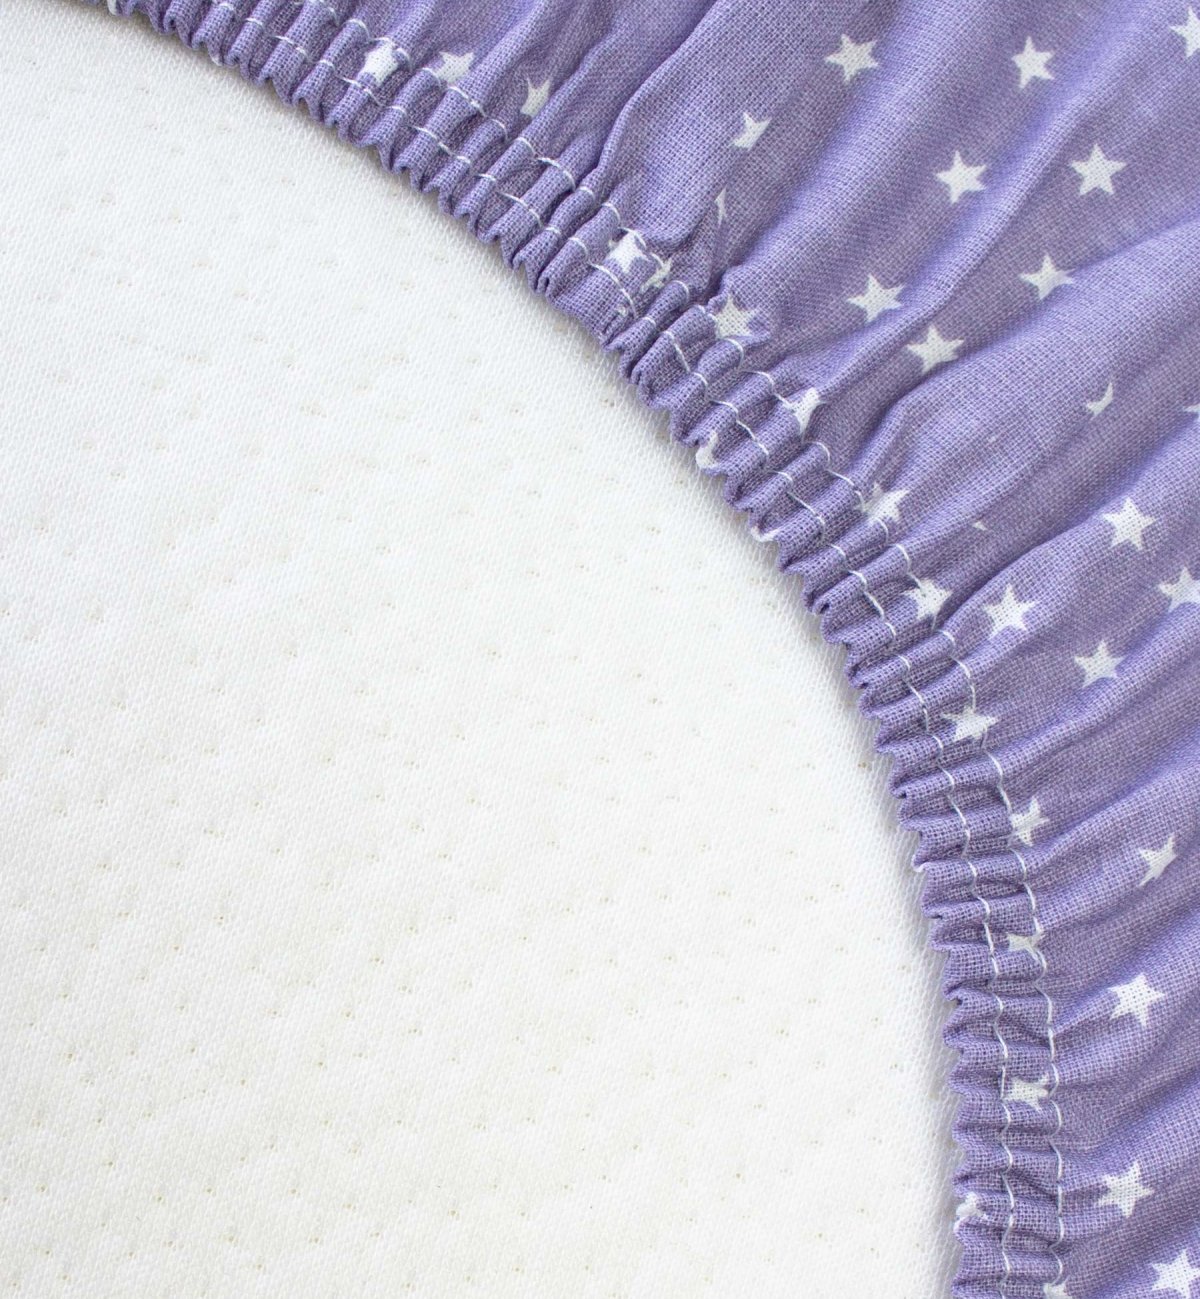 Organic Cotton fitted sheet with stars pattern for crib